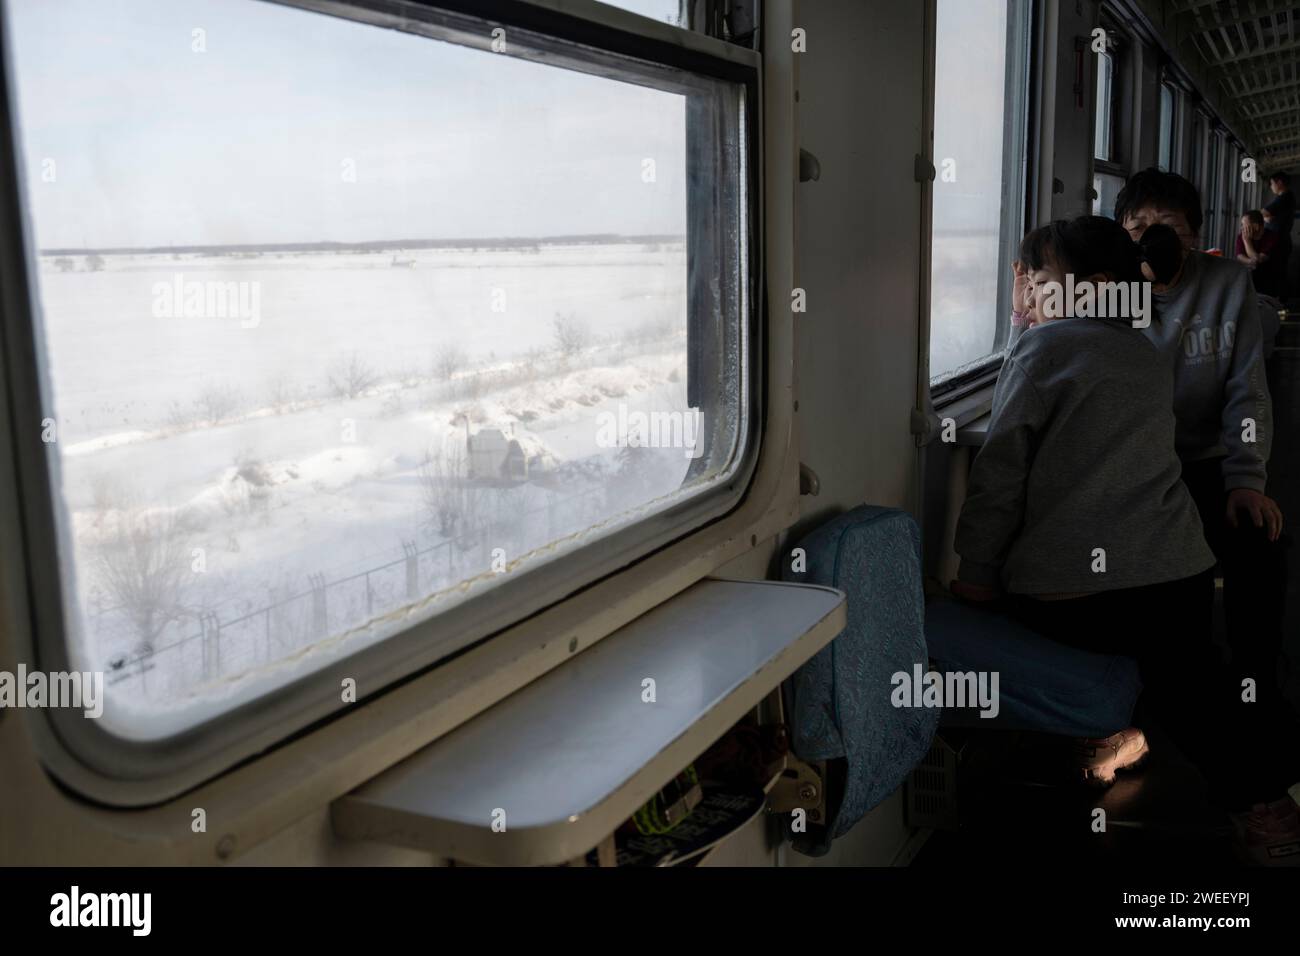 Harbin. 23rd Jan, 2024. Passengers ride the train K7065 from Harbin to Fuyuan in northeast China's Heilongjiang Province, Jan. 23, 2024. The train K7065/K7066 travels to and fro between the city of Harbin and Fuyuan in China's northeastern province of Heilongjiang. With a single journey time of nearly 15 hours, the train replaced old carriages with new ones having air conditioning system, offering a better travel experience for locals who visit friends or commute to work or study along the line. Credit: Cai Yang/Xinhua/Alamy Live News Stock Photo